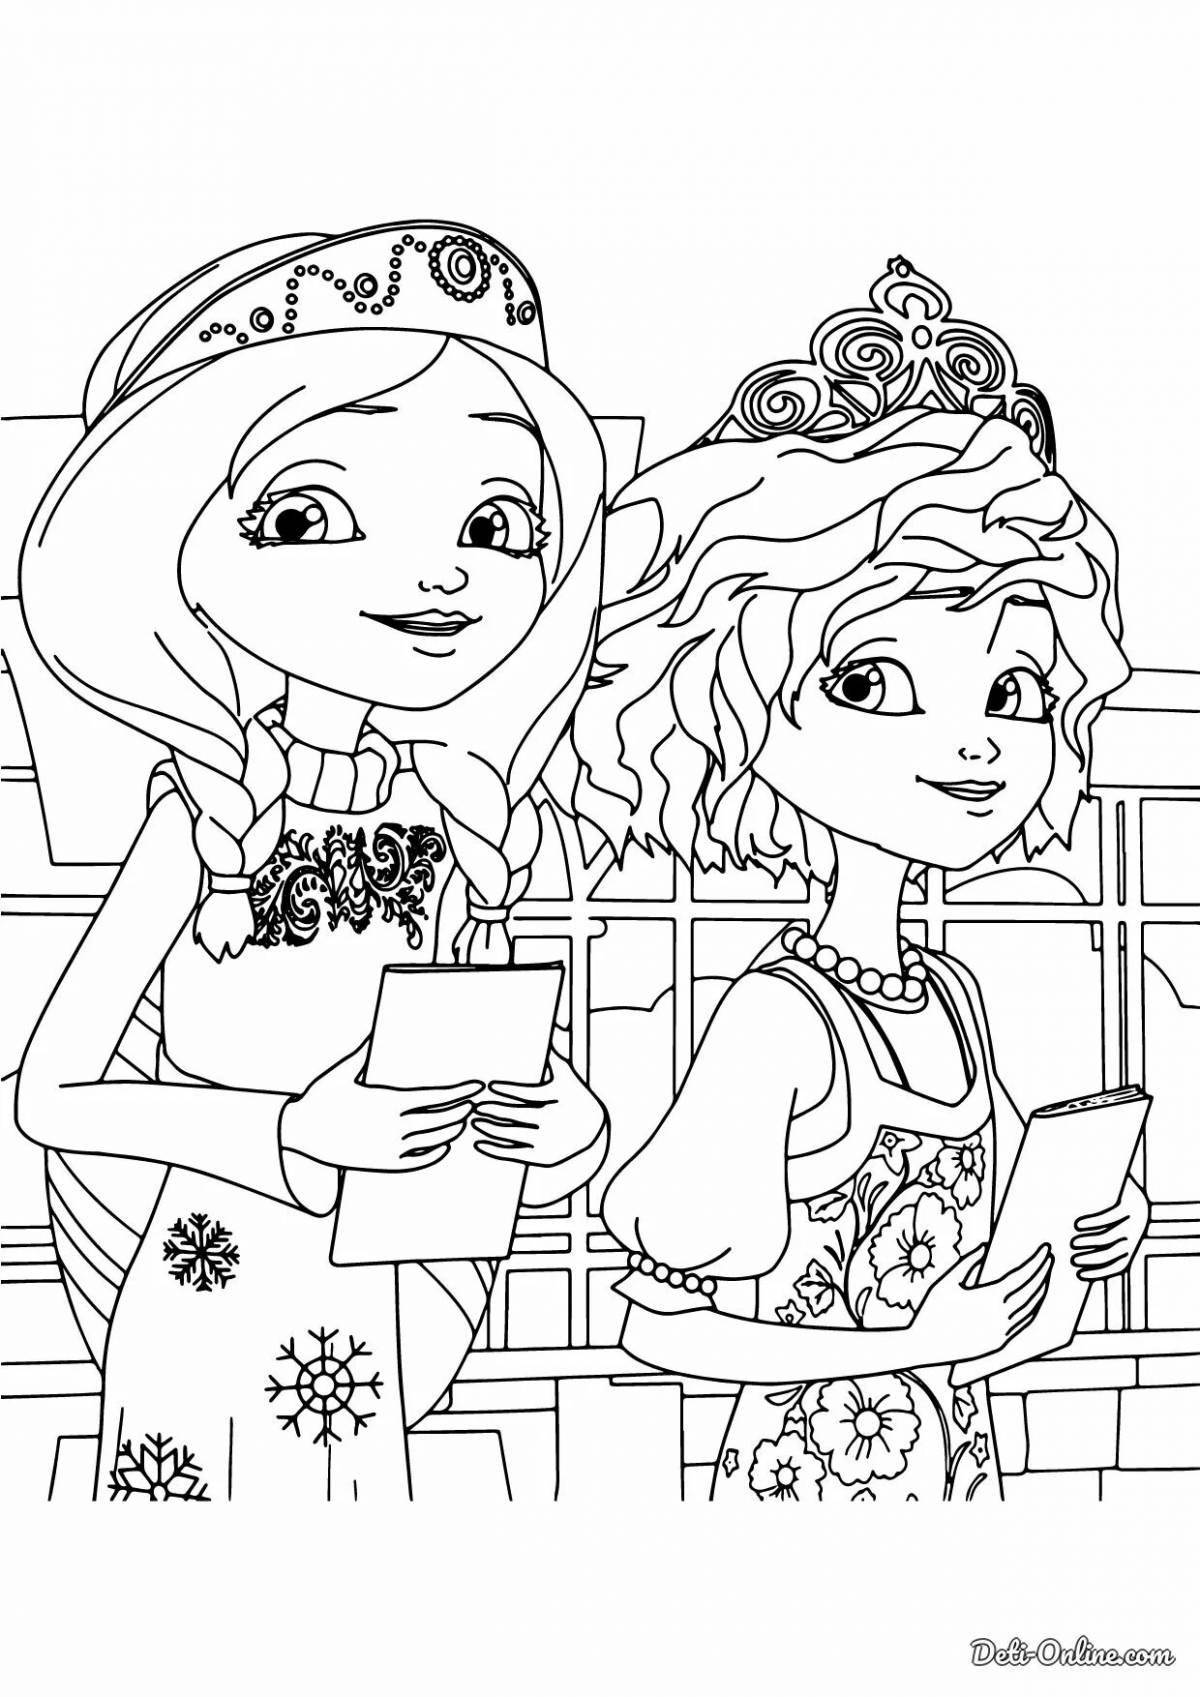 Adorable princess coloring pages for girls